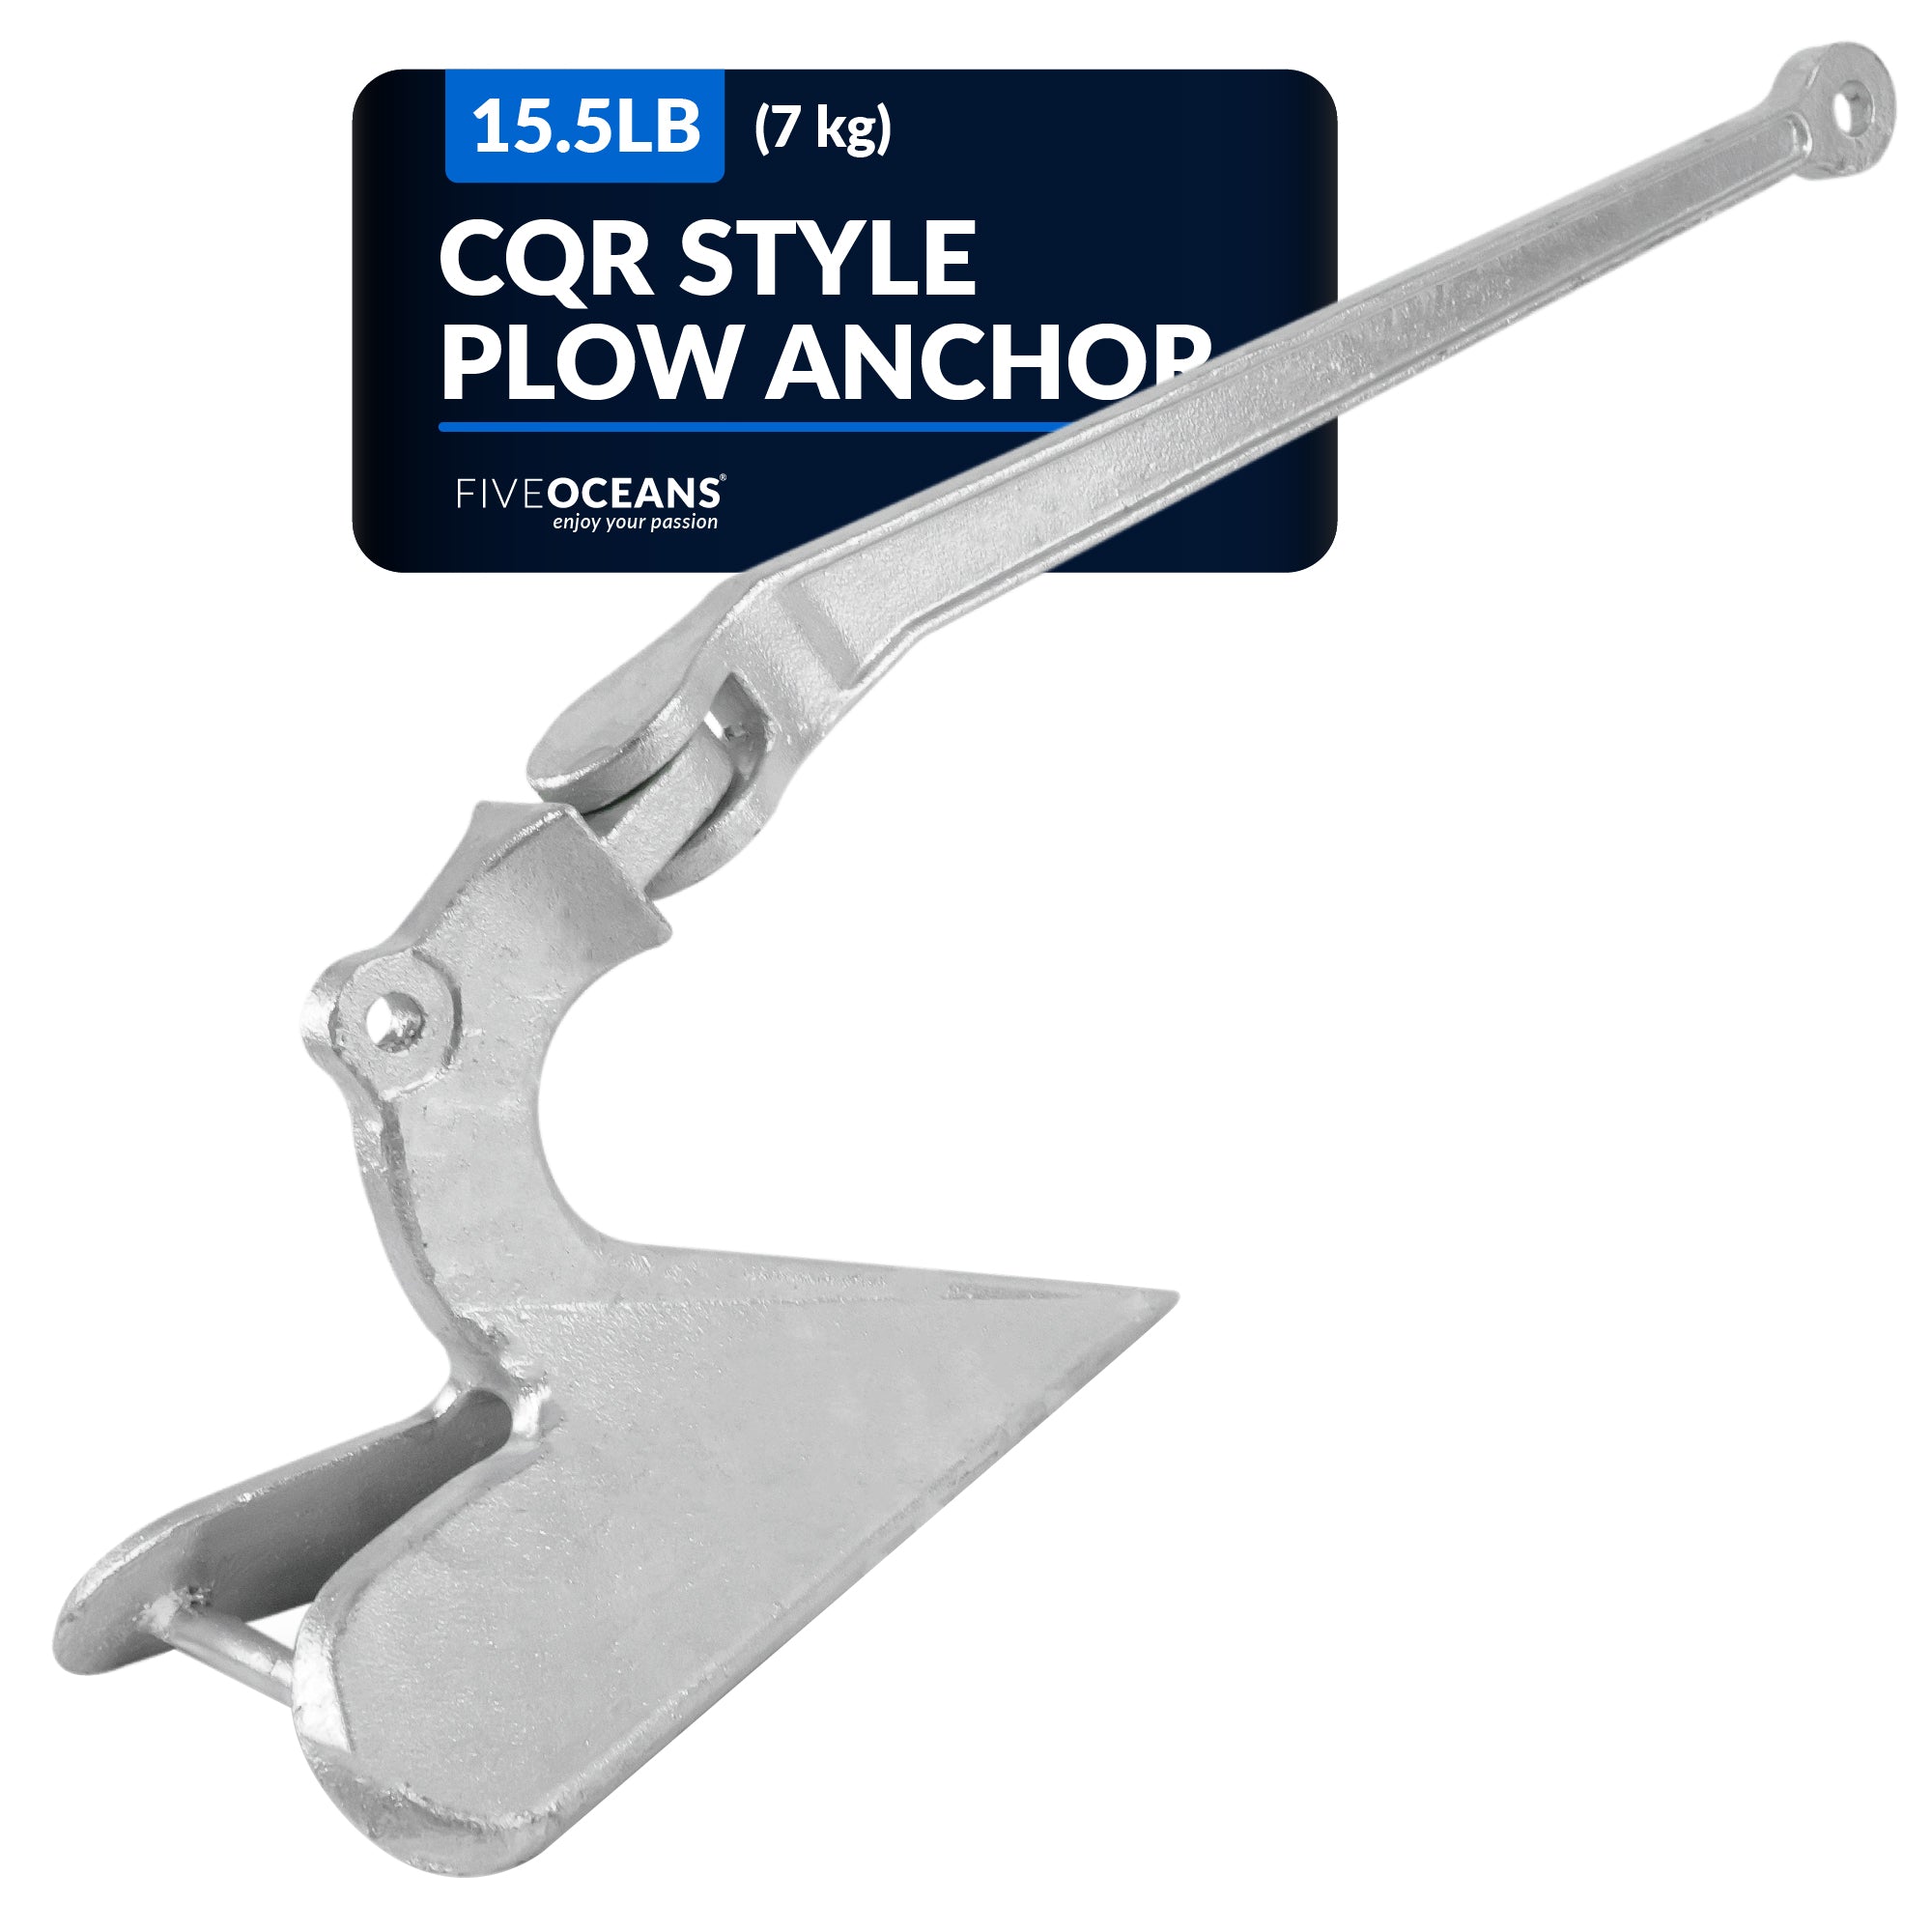 CQR Style Plow Anchor,  15.5 Lb / 7 Kg, Hot Dipped Galvanized Steel - FO349